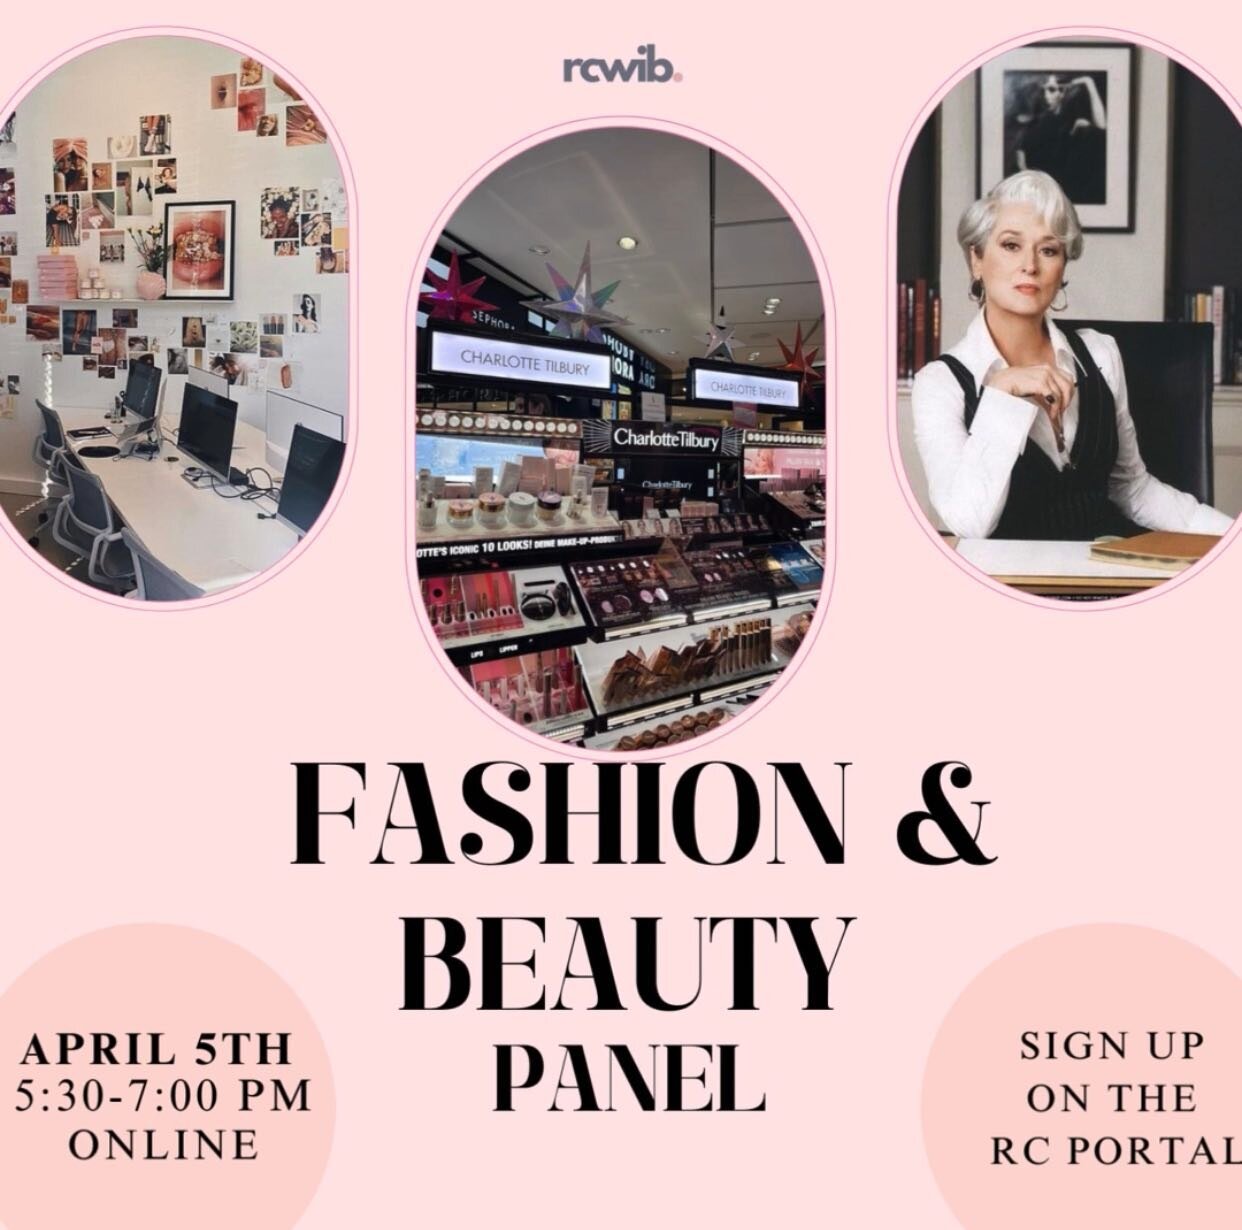 ✨Don&rsquo;t miss this Friday&rsquo;s virtual event on &ldquo;Business in Beauty: Strategies for Success in Fashion and Beauty Careers&rdquo;! 💄👗

📌 Join us on April 5th from 5:30 pm to 7 pm via Zoom for an interesting discussion led by industry e